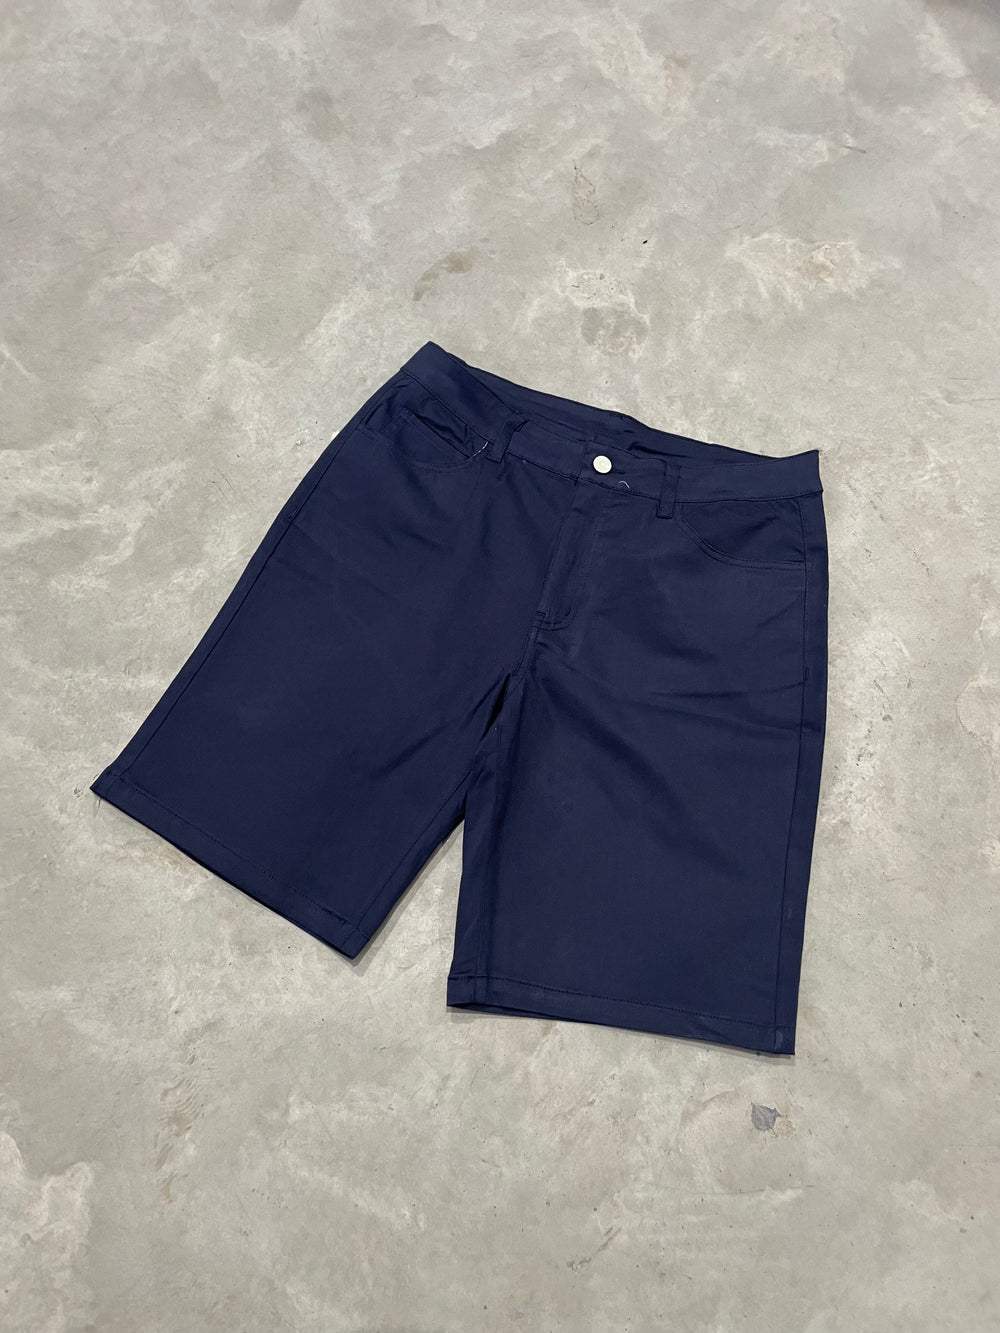 Capo CHINO Short - Navy – CAPO | Meaning Behind The Brand